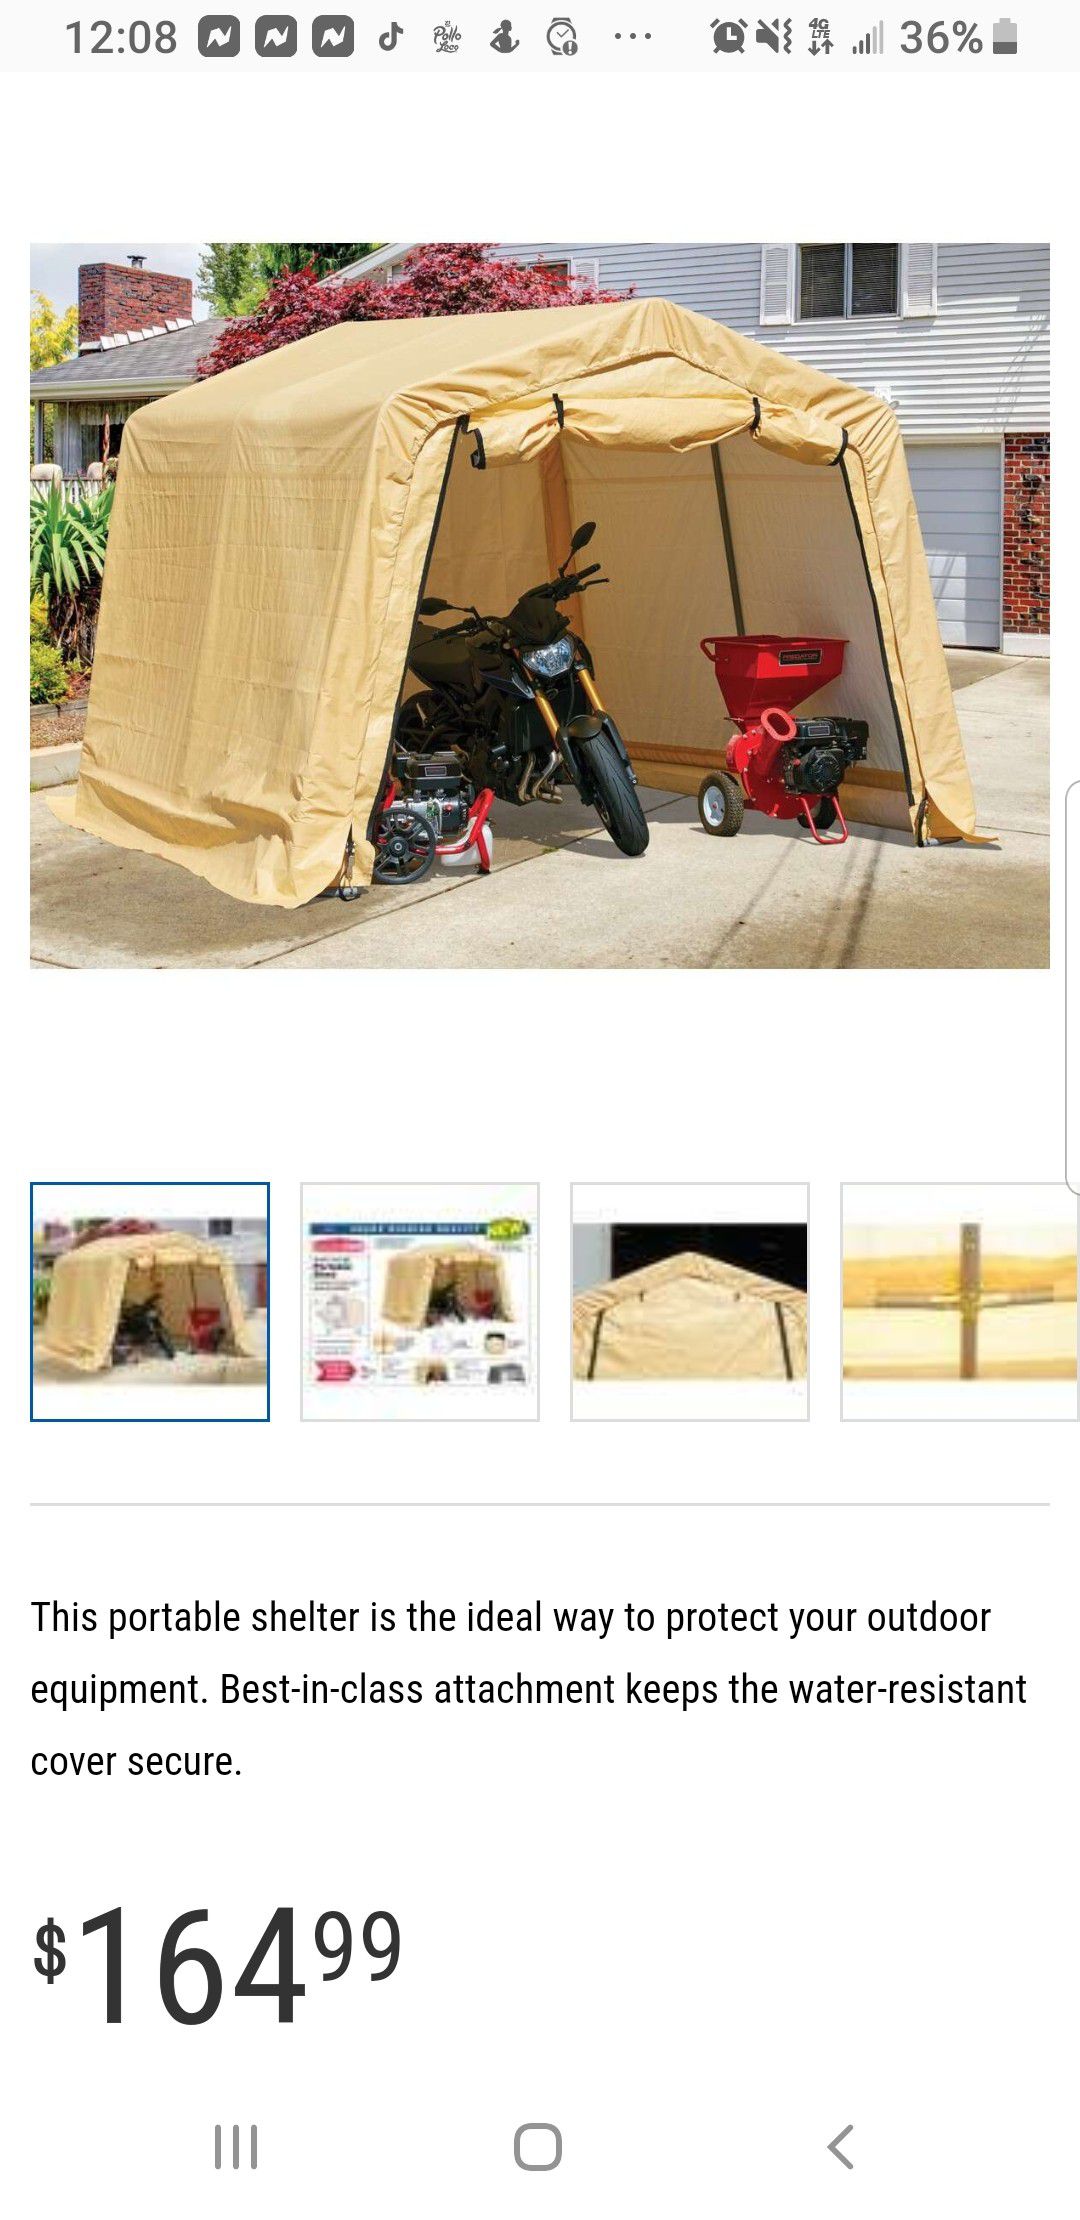 Portable shed